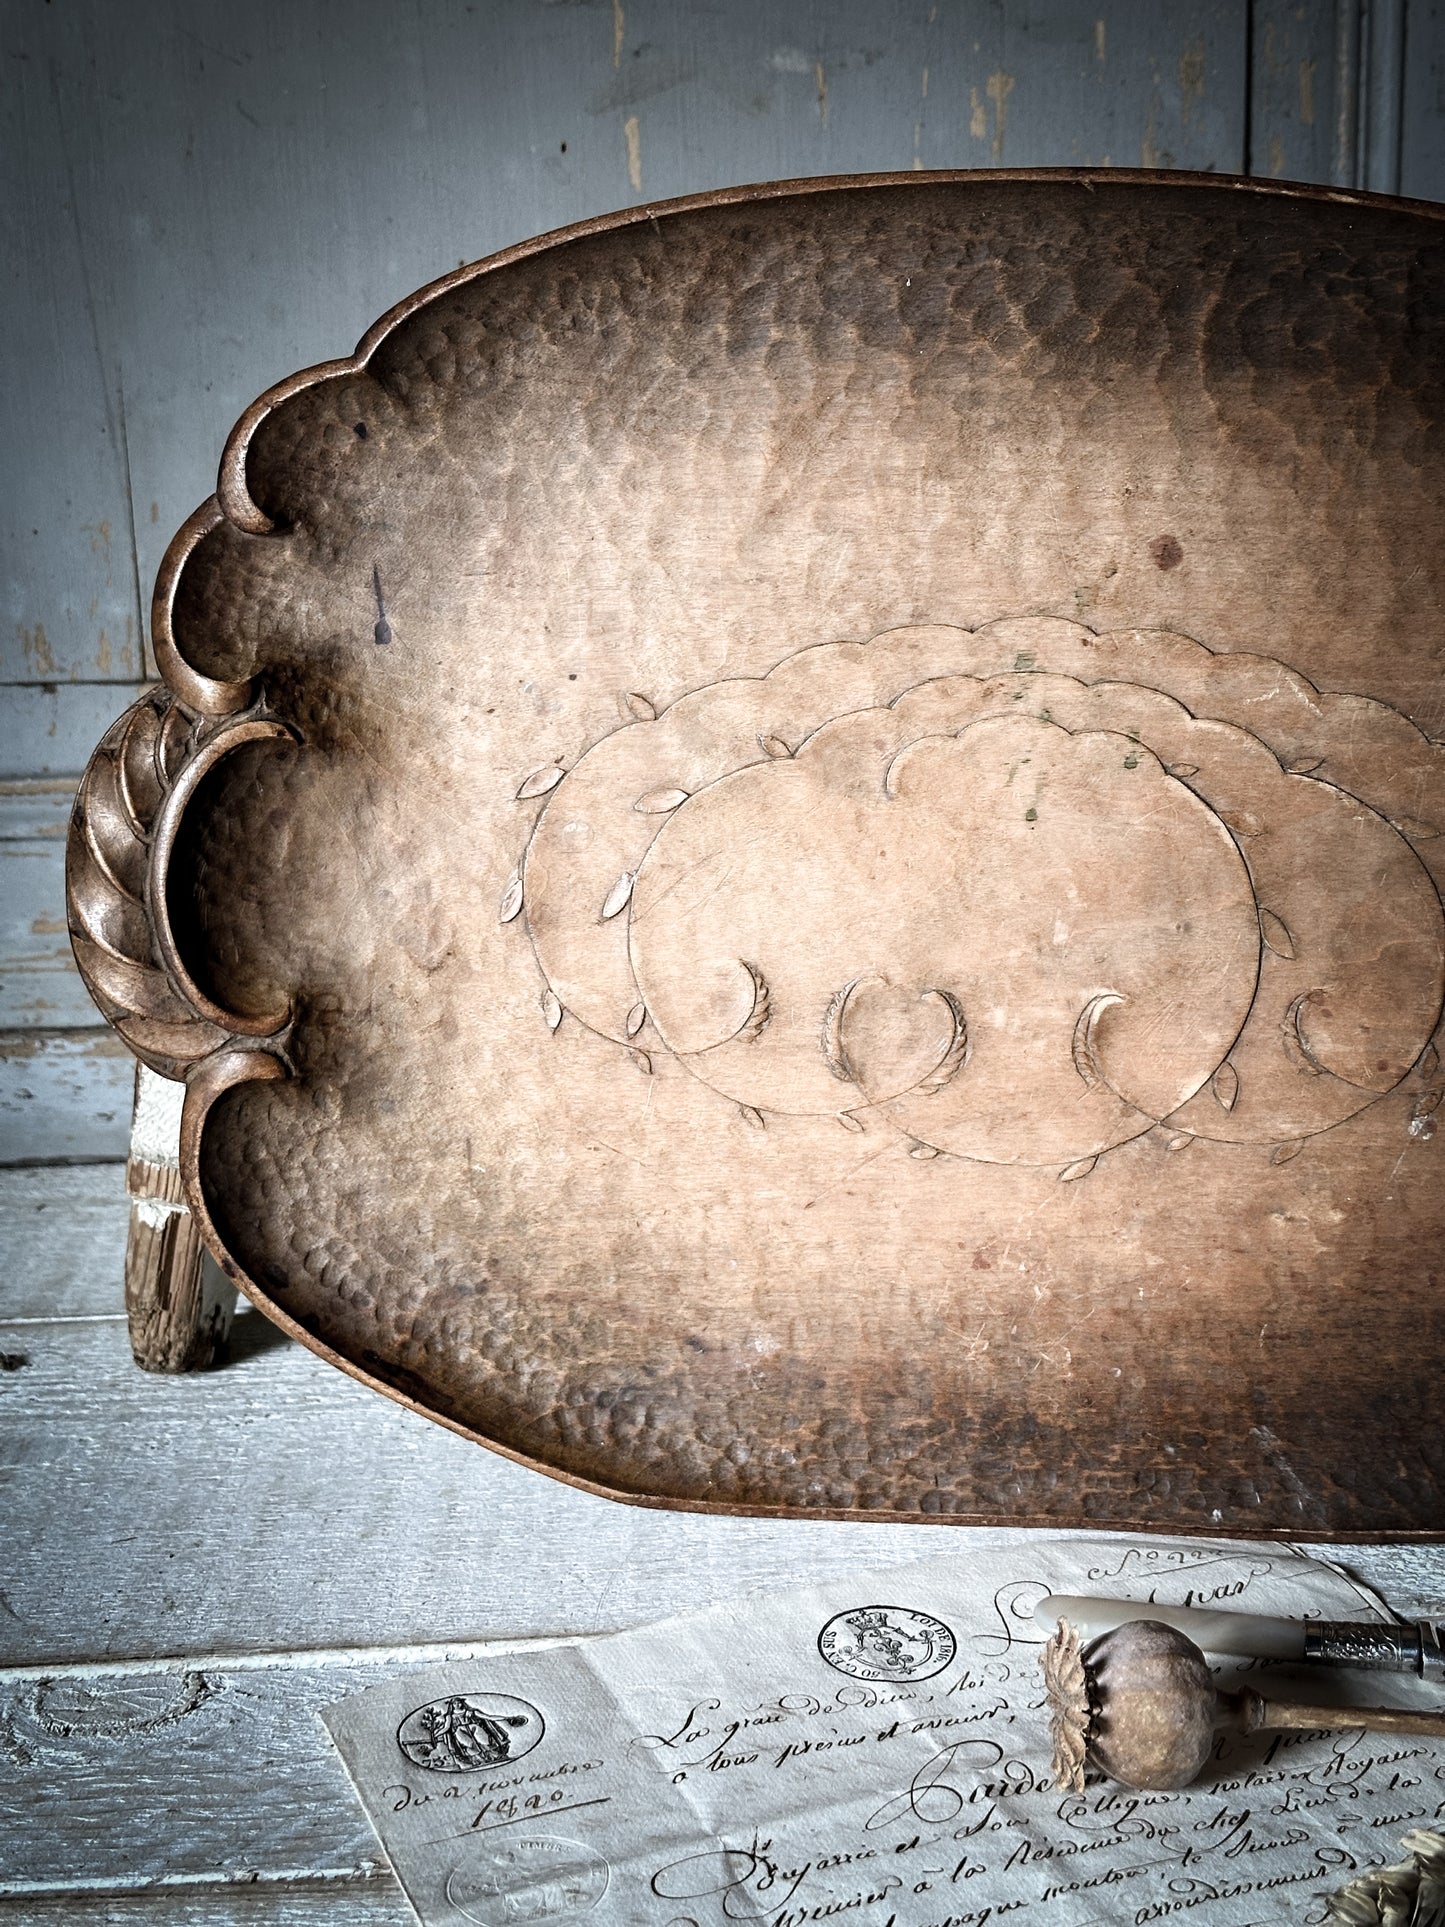 A beautiful antique carved bread tray or bread board